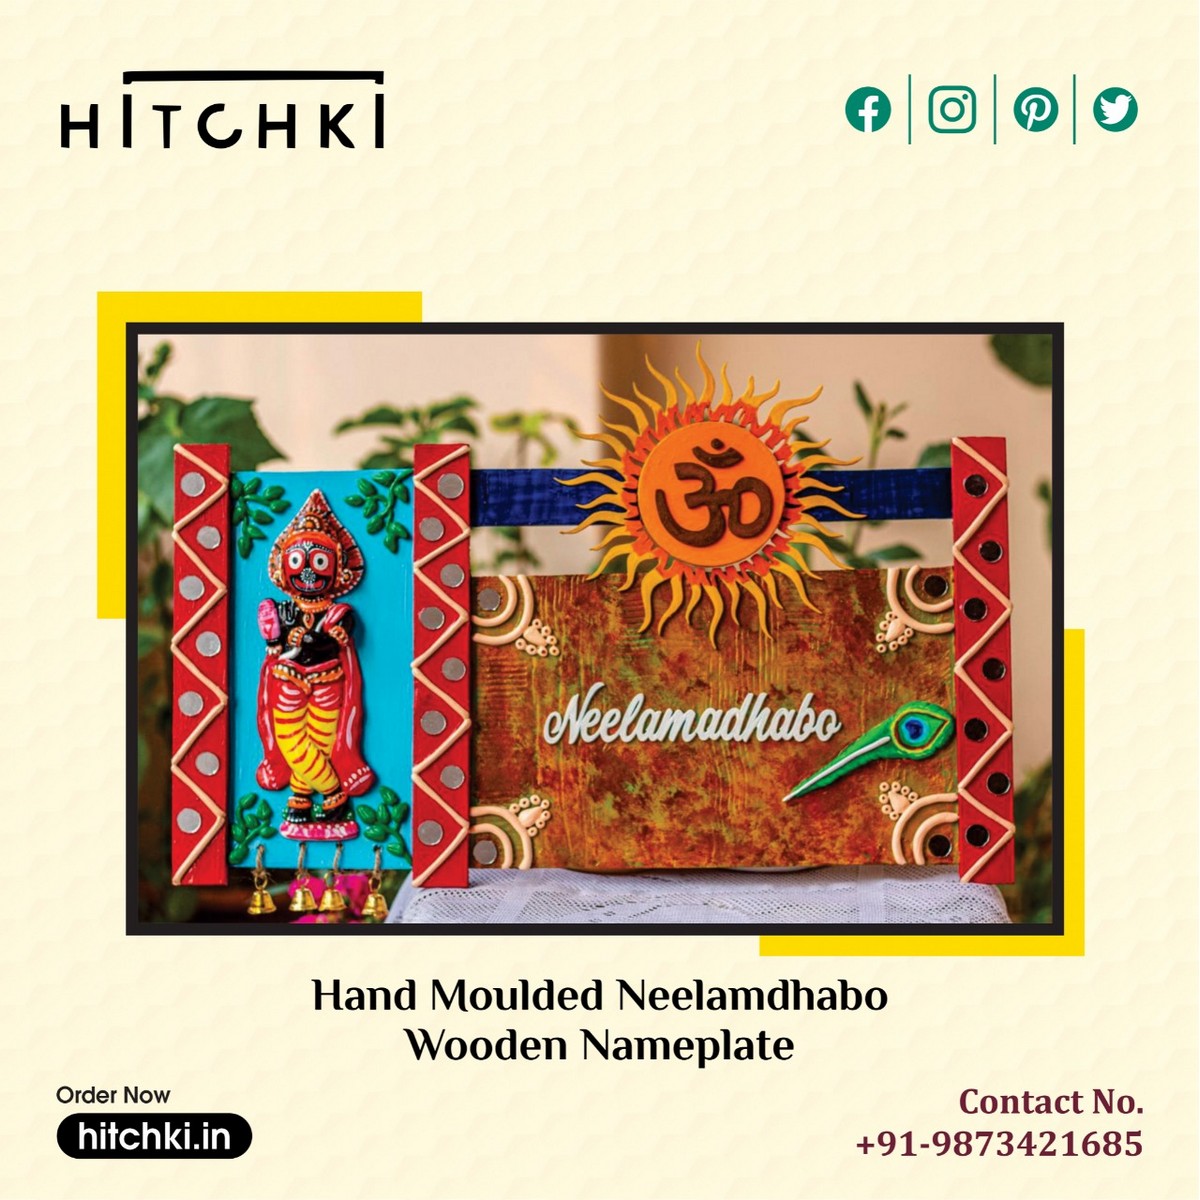 Highly Colourful And Traditionally Designed Nameplate Handcrafted 